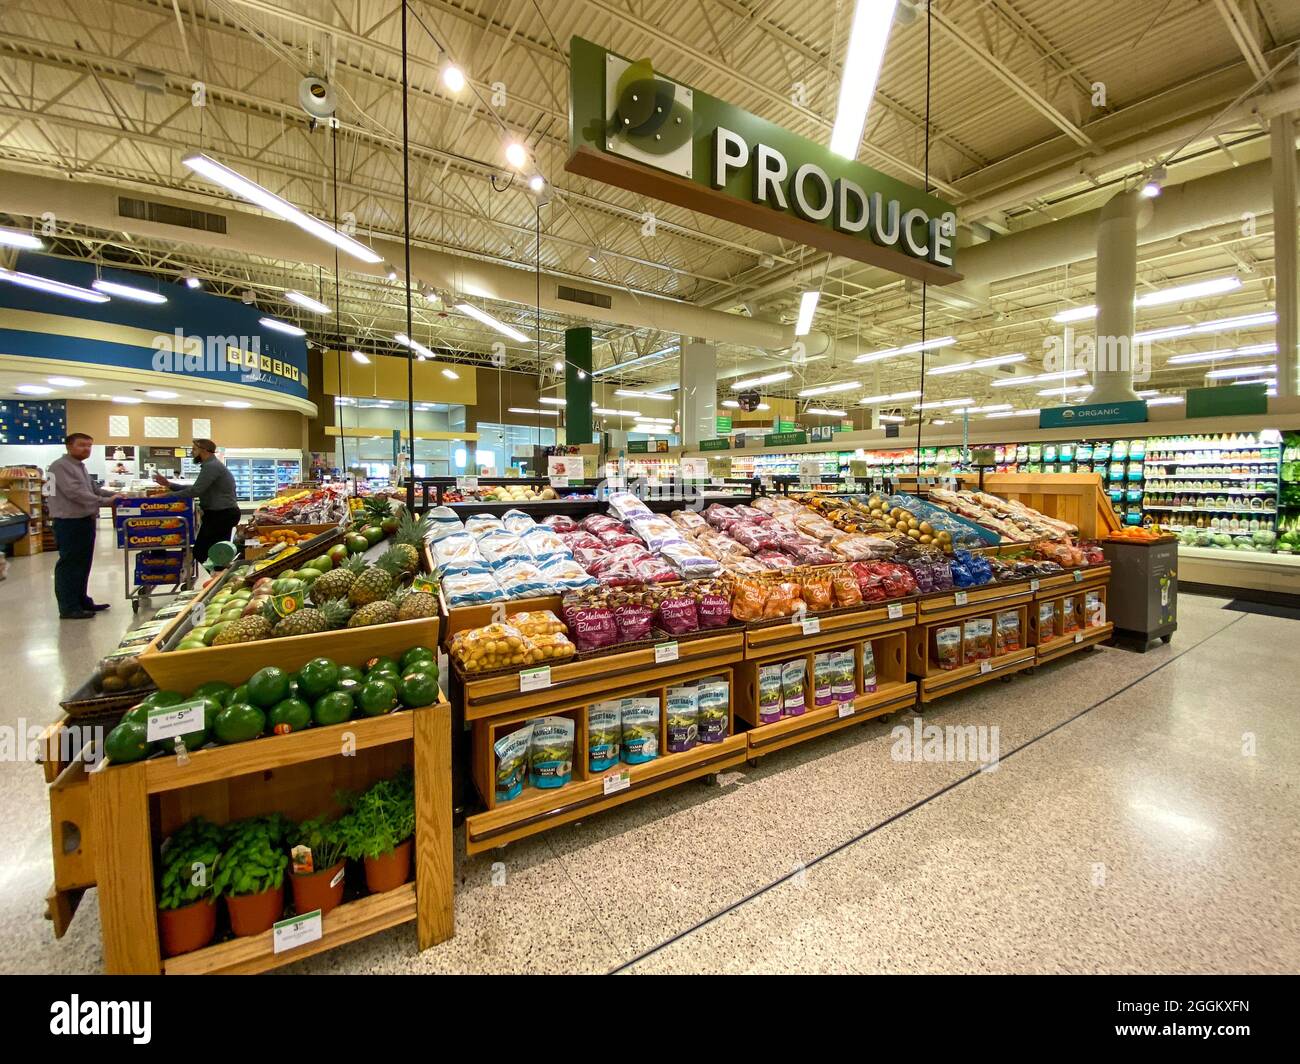 Orlando,FL USA - January 15, 2020:  The produce aisle at a Publix grocery store in Orlando, Florida. Stock Photo